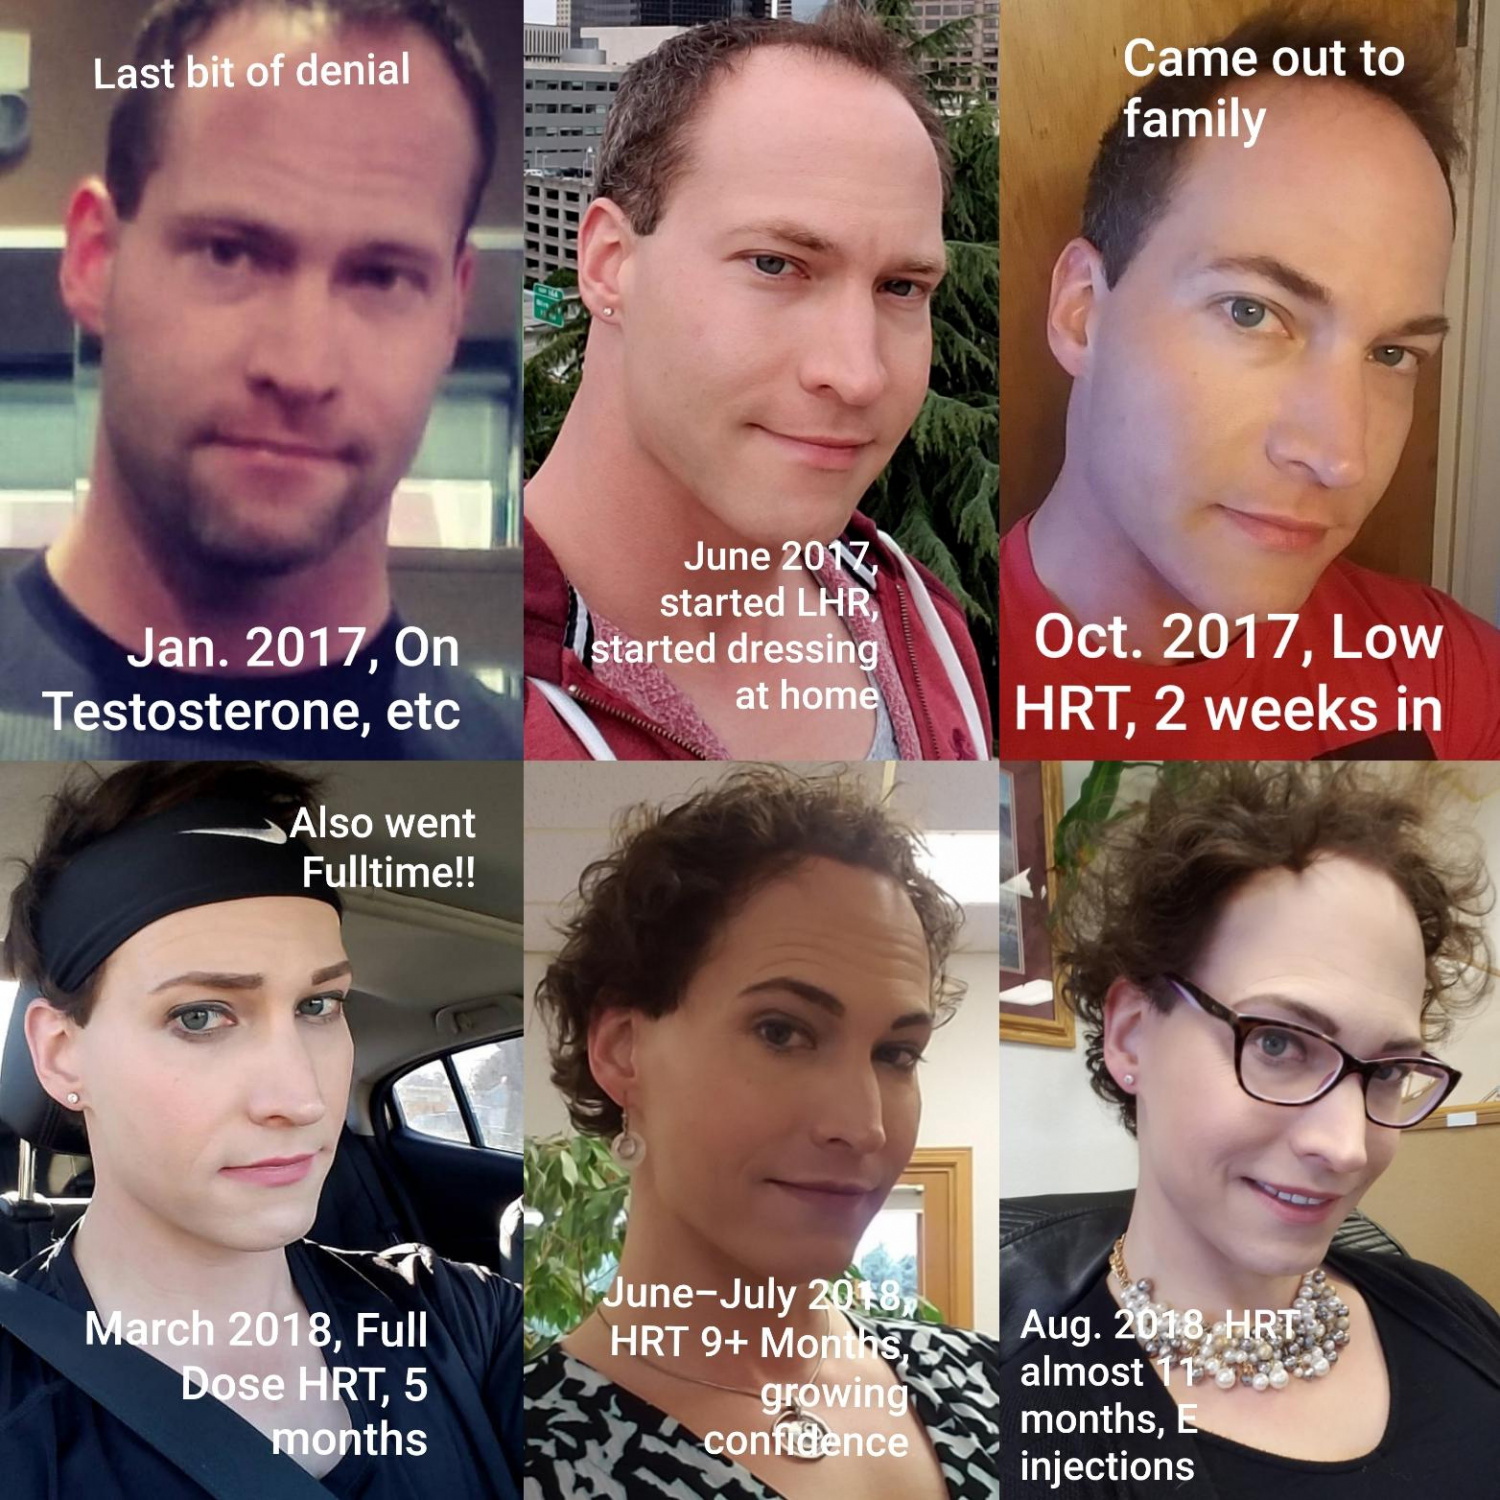 hair coloring - Last bit of denial Came out to family Jan. 2017, On Testosterone, etc June 20N started Lhr started dressing at home Oct. 2017, Low Hrt, 2 weeks in Also went Fulltime!! June, Hrt 9 Moms Aug. 2018, Hrte , Full Dose Hrt, 5 months growing almo